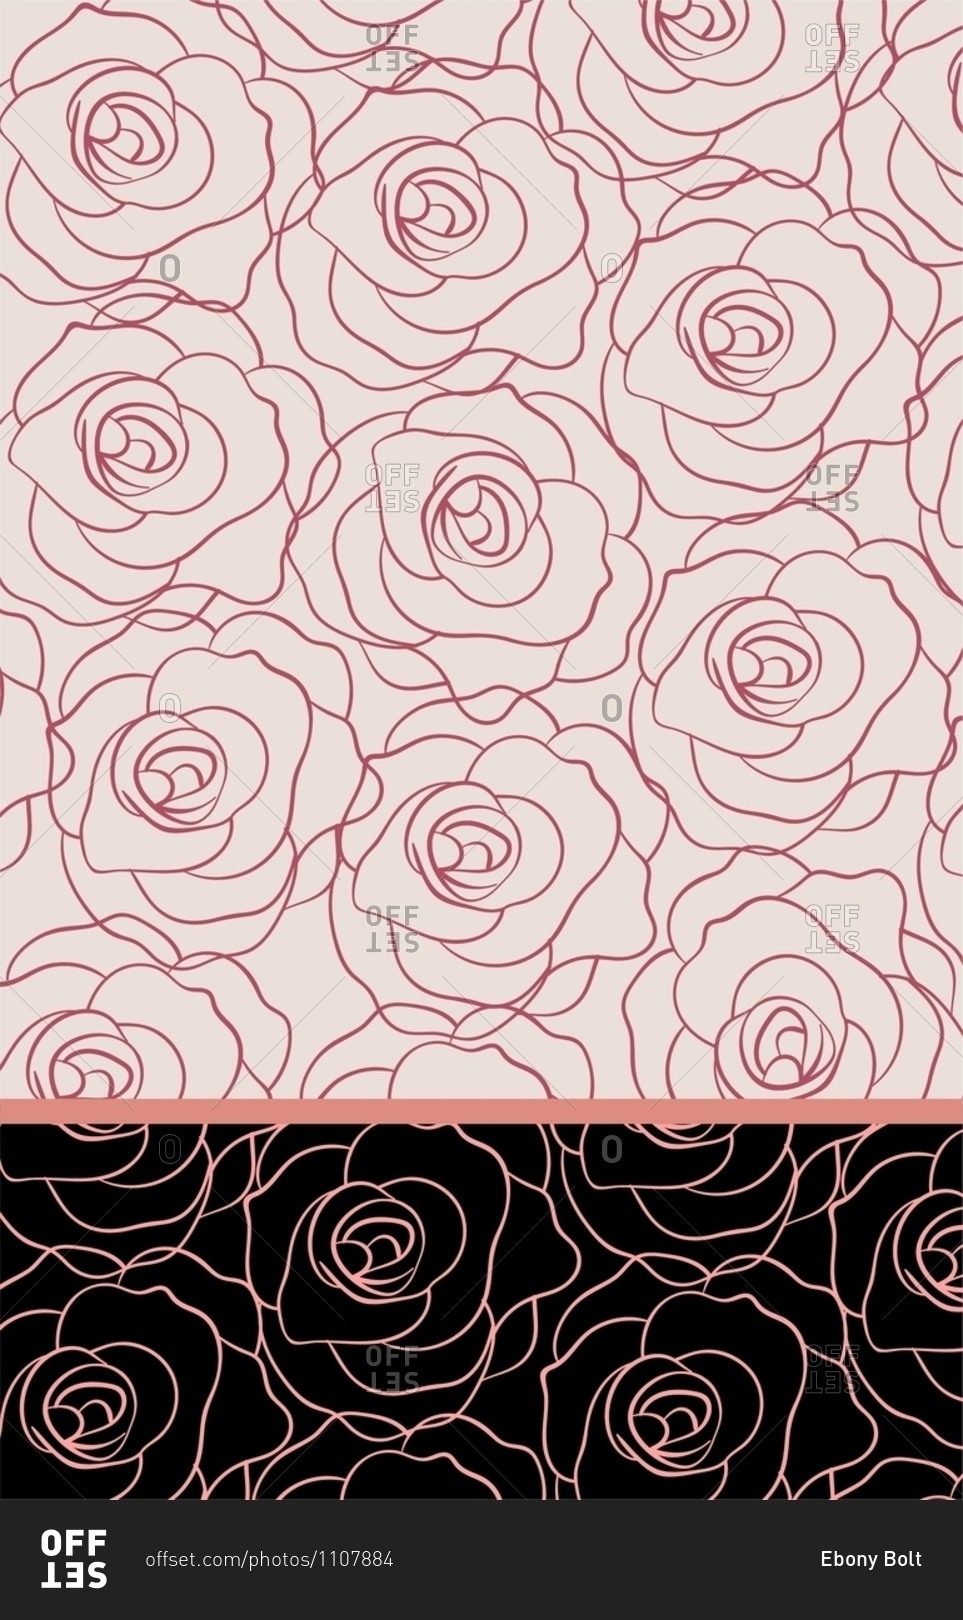 Rose motifs with a contrast black background border stock\
photo - OFFSET